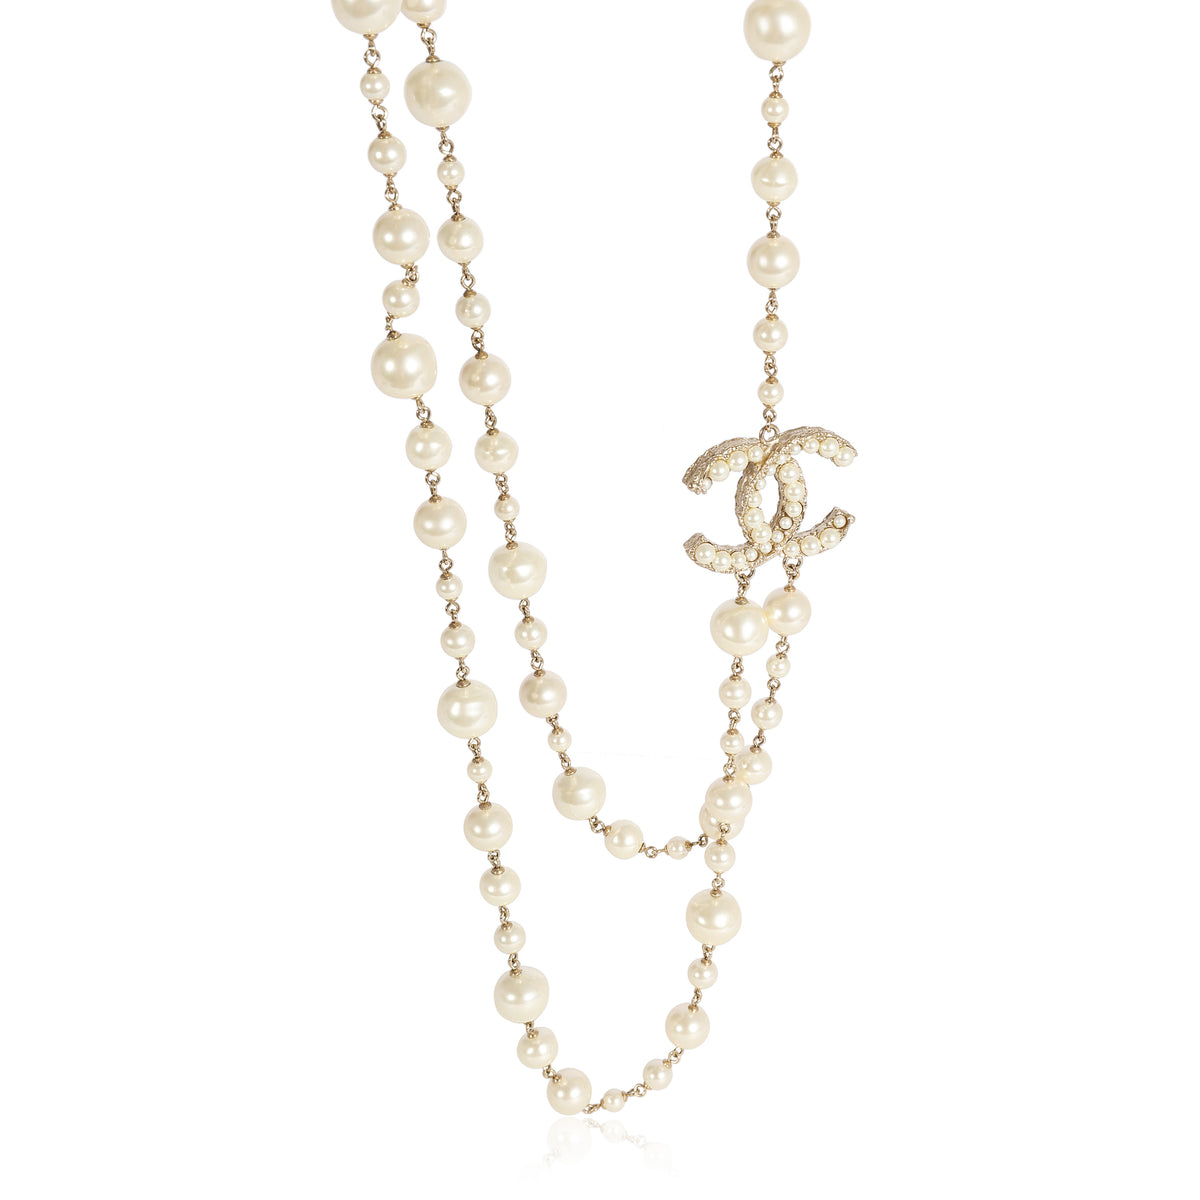 Chanel Strass CC Faux Pearl Double Layered Necklace Chanel